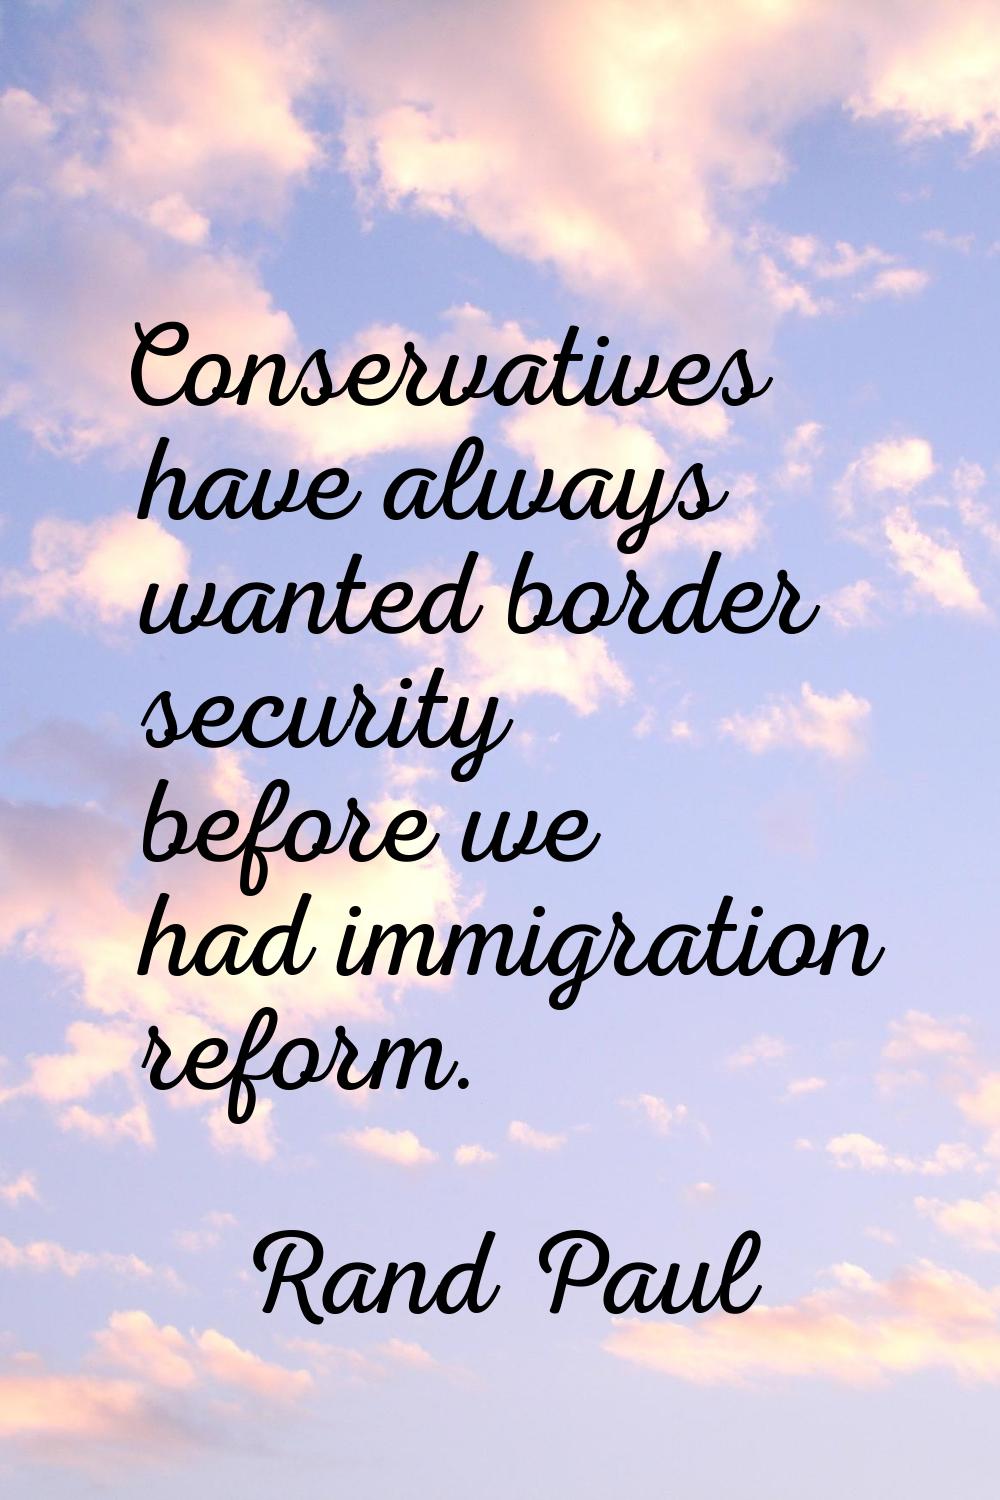 Conservatives have always wanted border security before we had immigration reform.